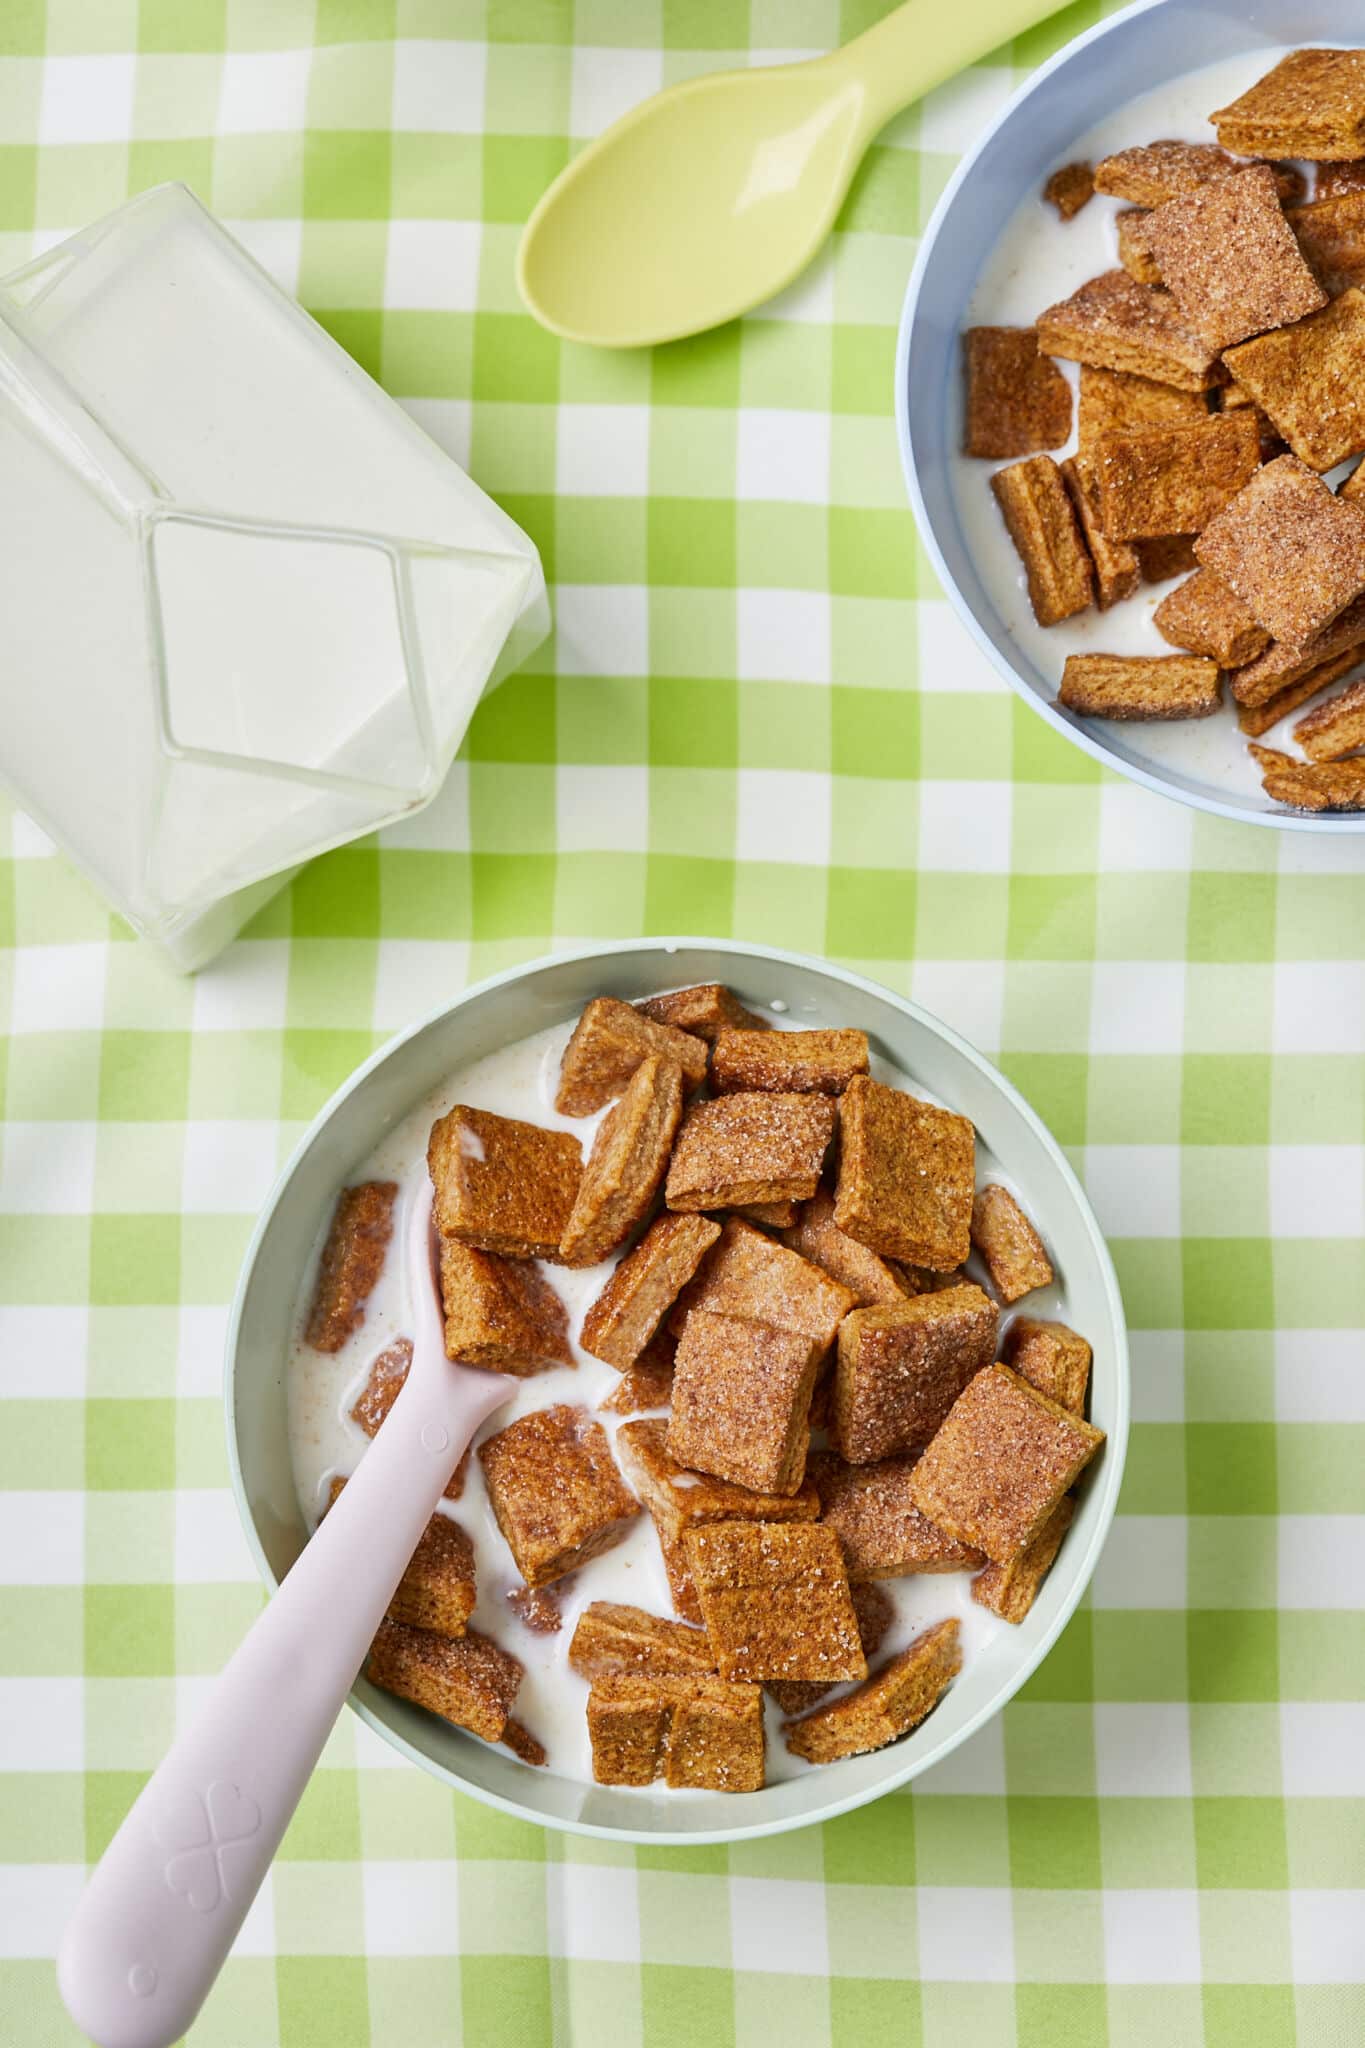 Two bowls of Homemade Cinnamon Toast Crunch cereal is served with milk and spoons with the milk bottle on the left side. The cereal has hearty, extra-crispy squares of sweet, warmly-spicy cinnamon flavor. This wholesome version is a welcome and cozy option for breakfast or a snack. 